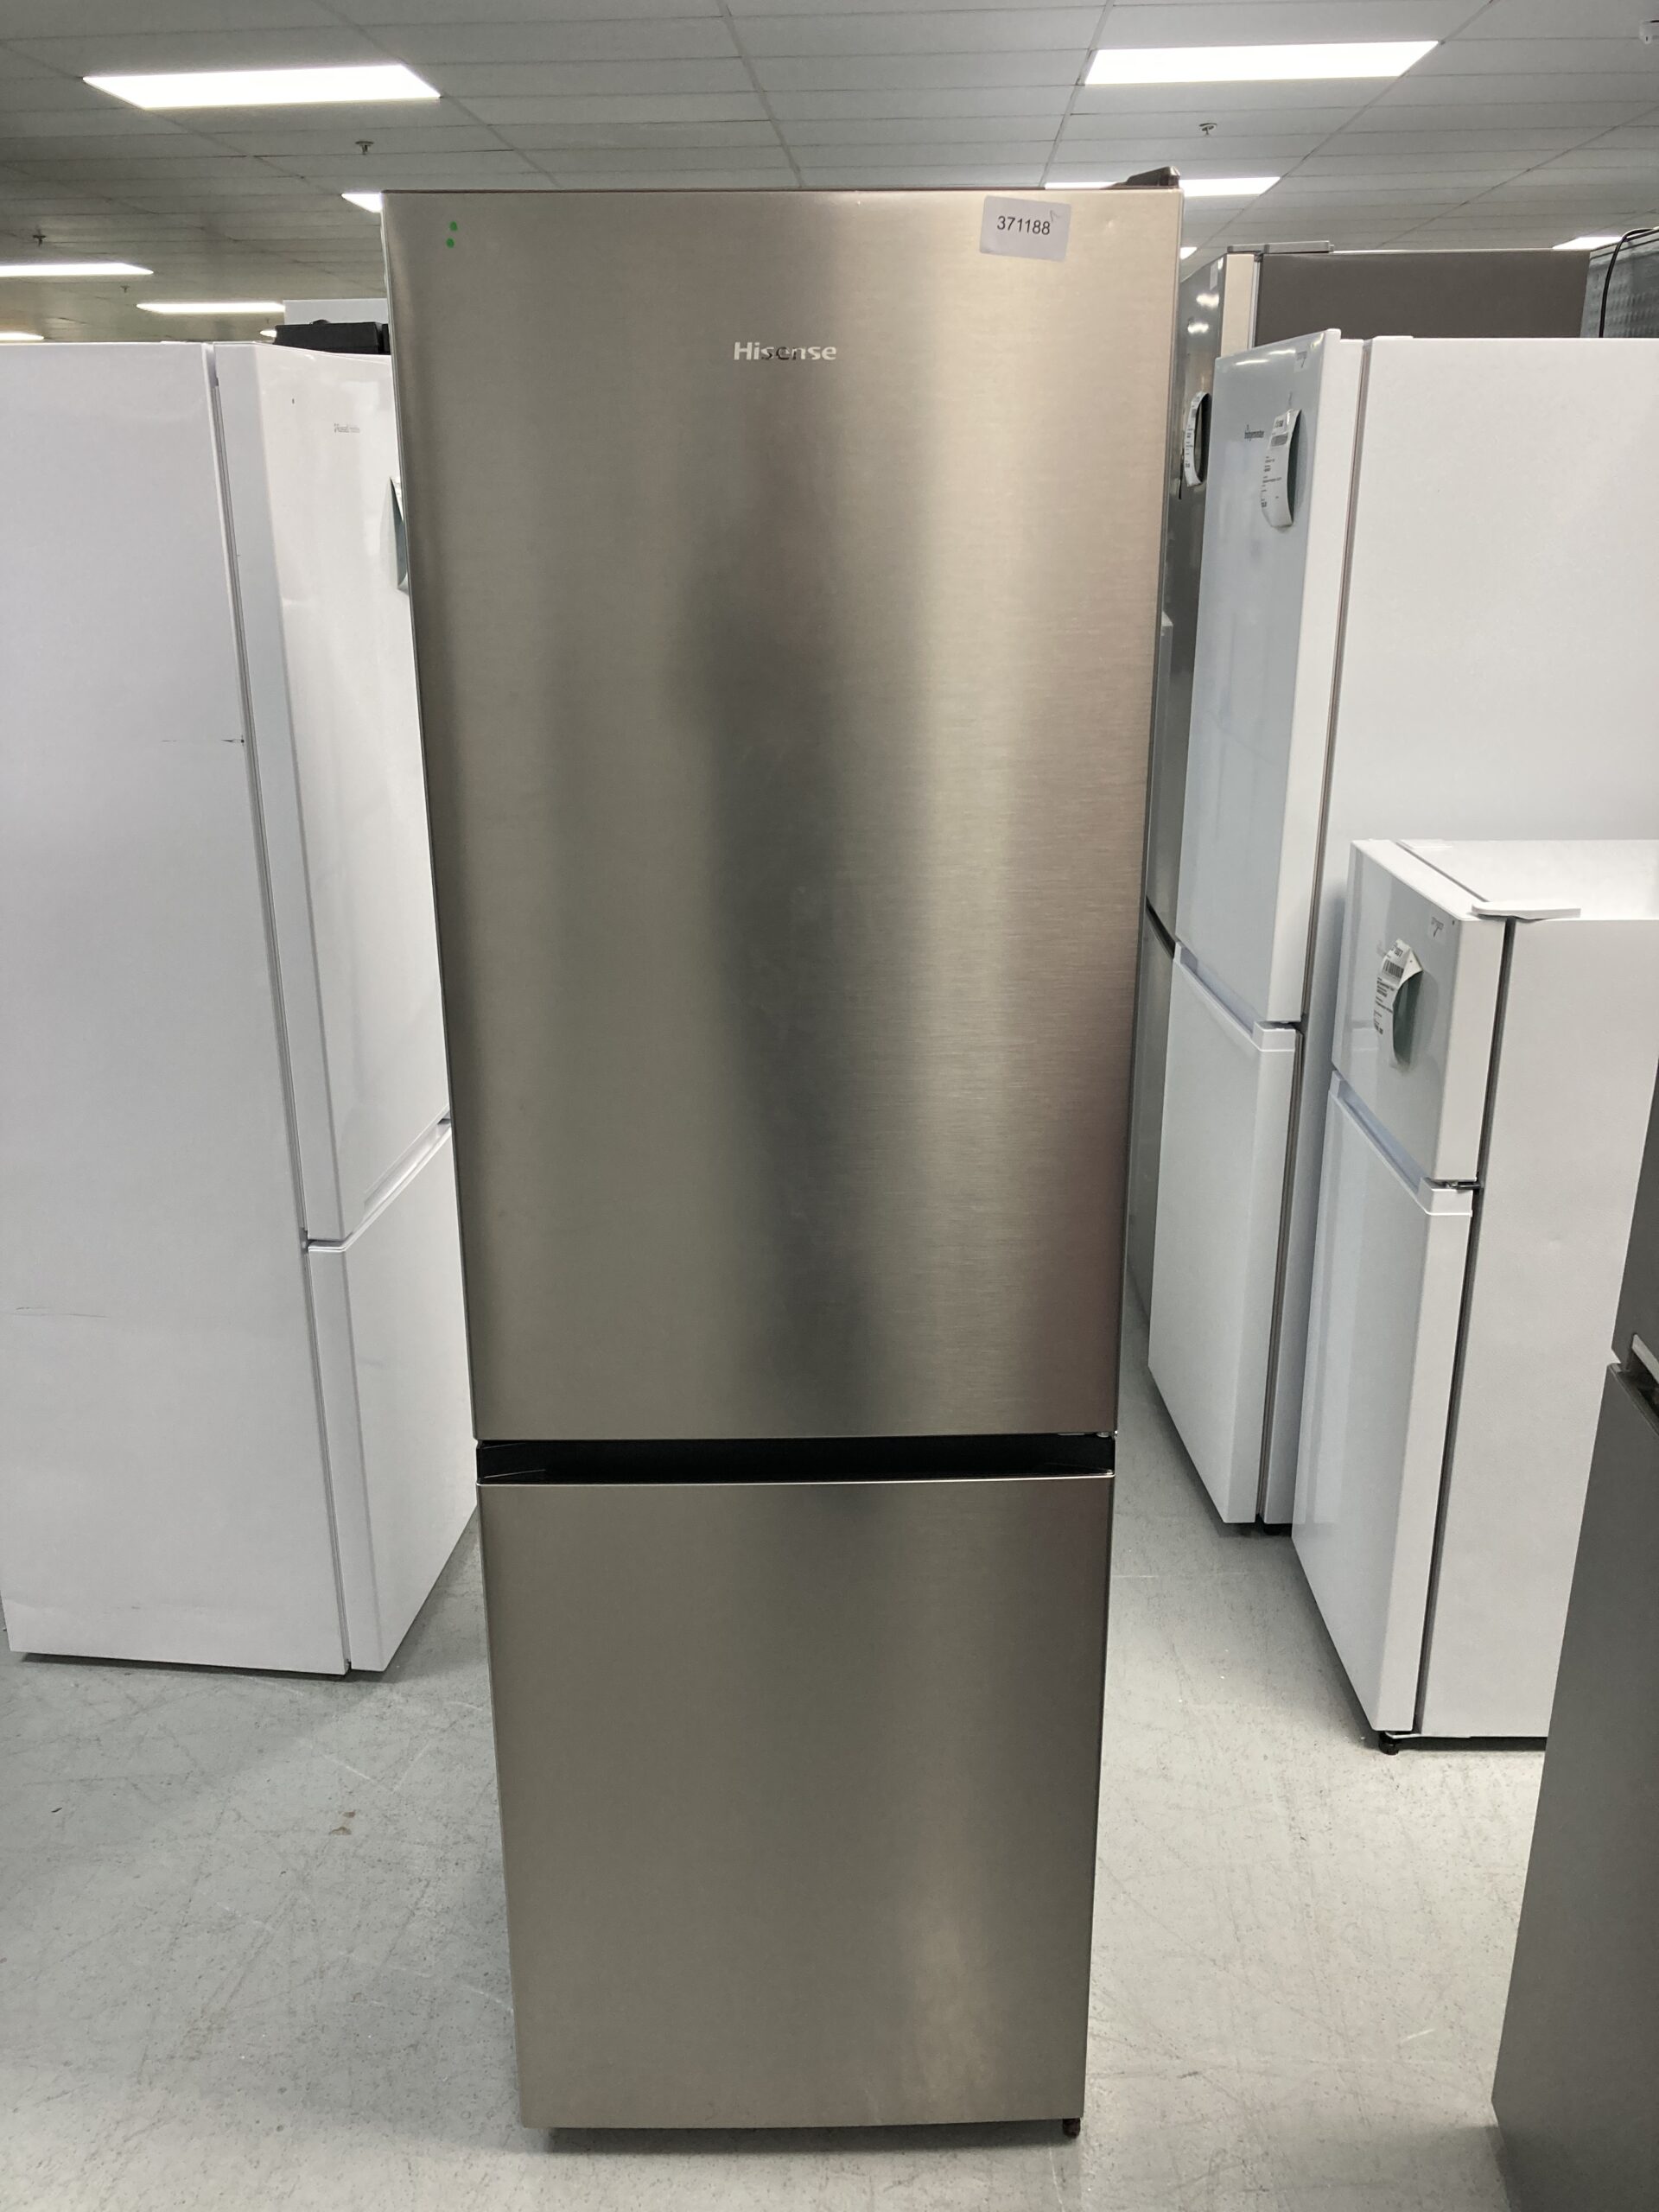 Hisense RB390N4ACE Total No Frost Fridge Freezer - Stainless Steel - E ...